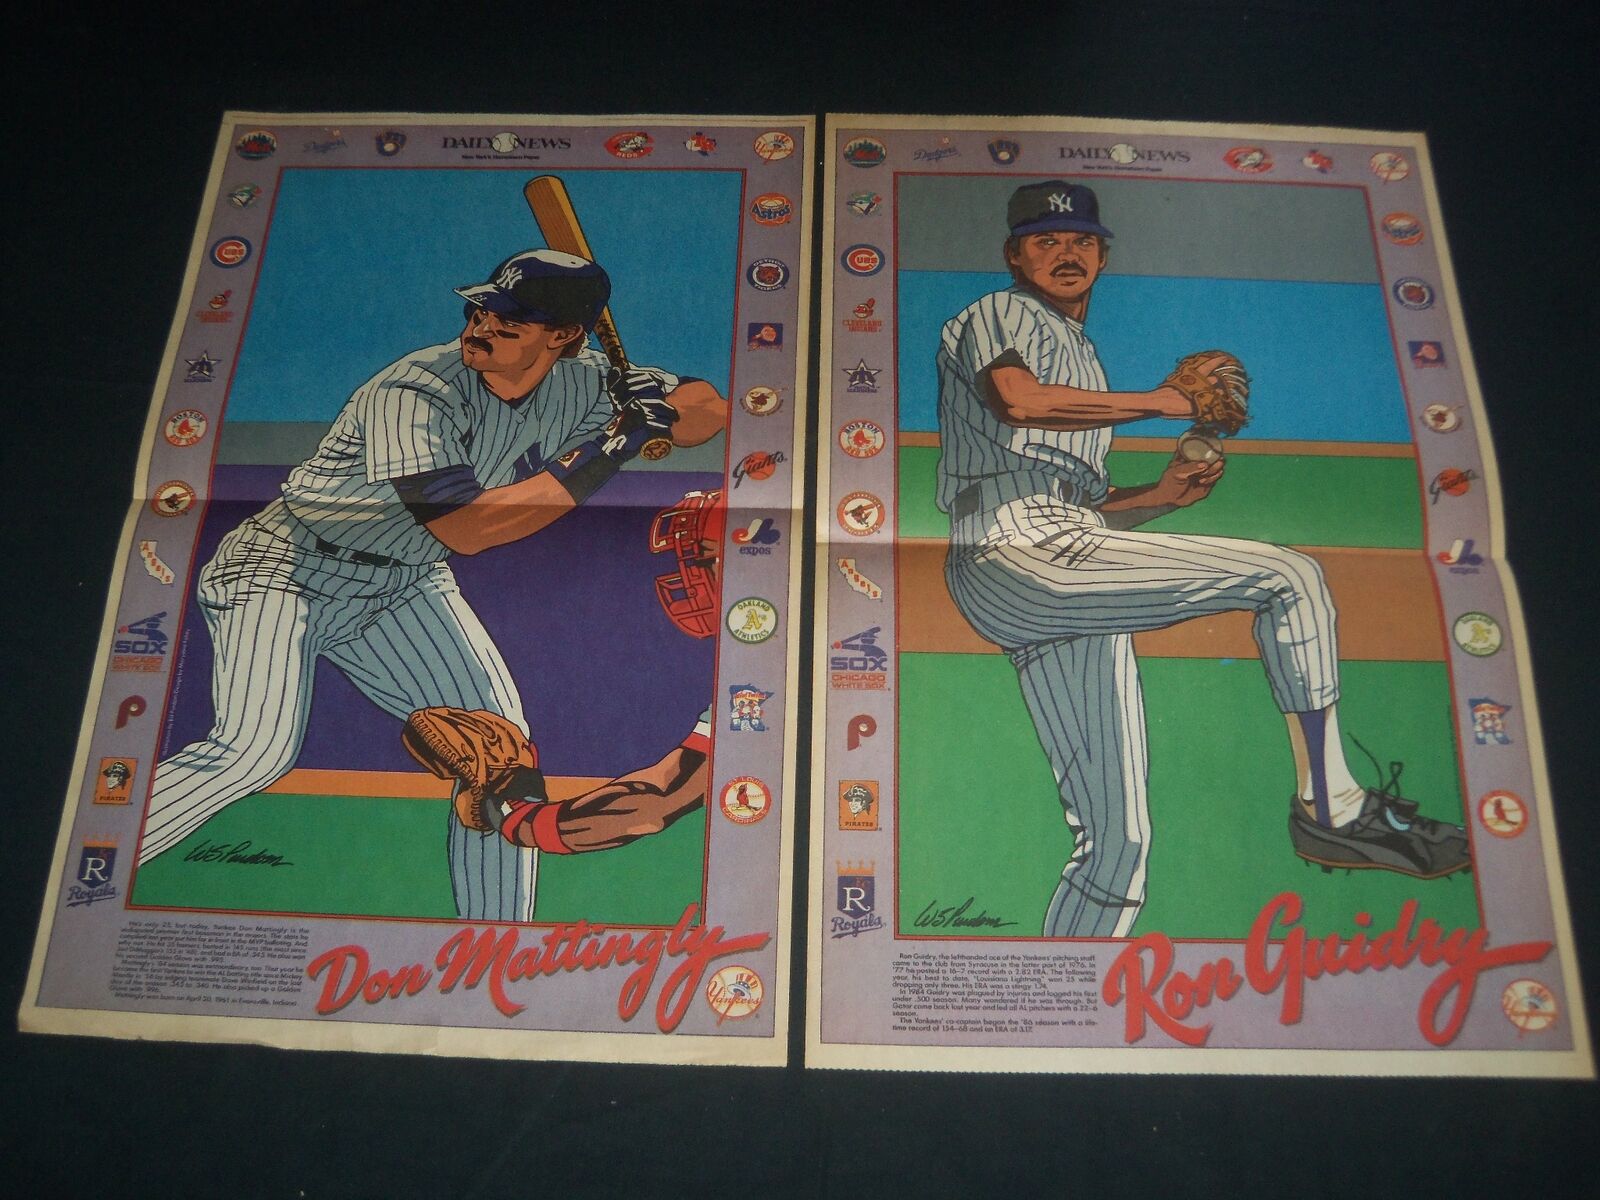 1986 NEW YORK DAILY NEWS - RON GUIDRY & DON MATTINGLY COLOR POSTERS - NP 3796